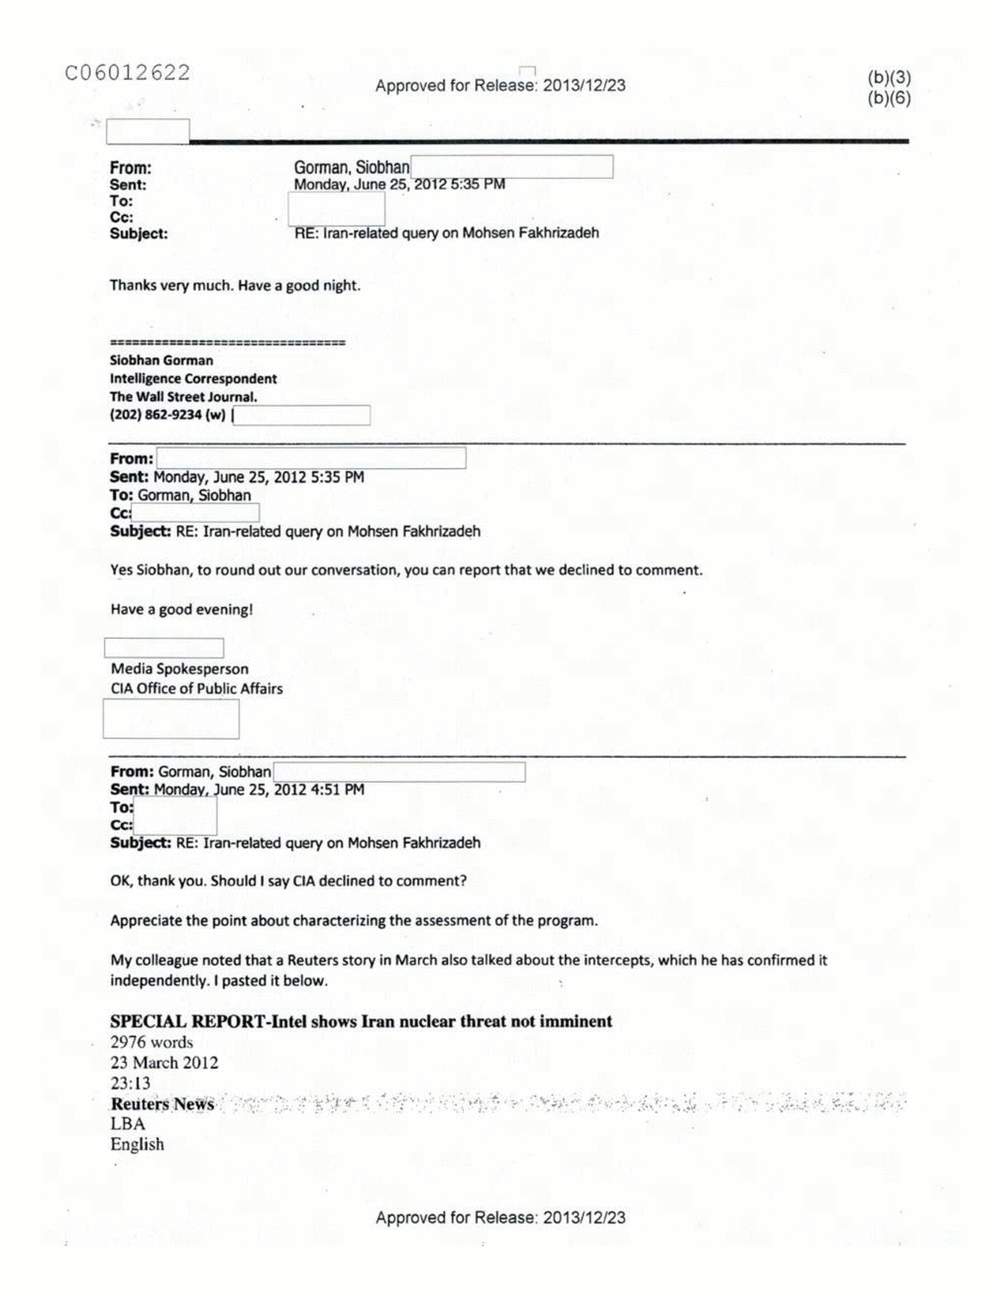 Page 173 from Email Correspondence Between Reporters and CIA Flacks